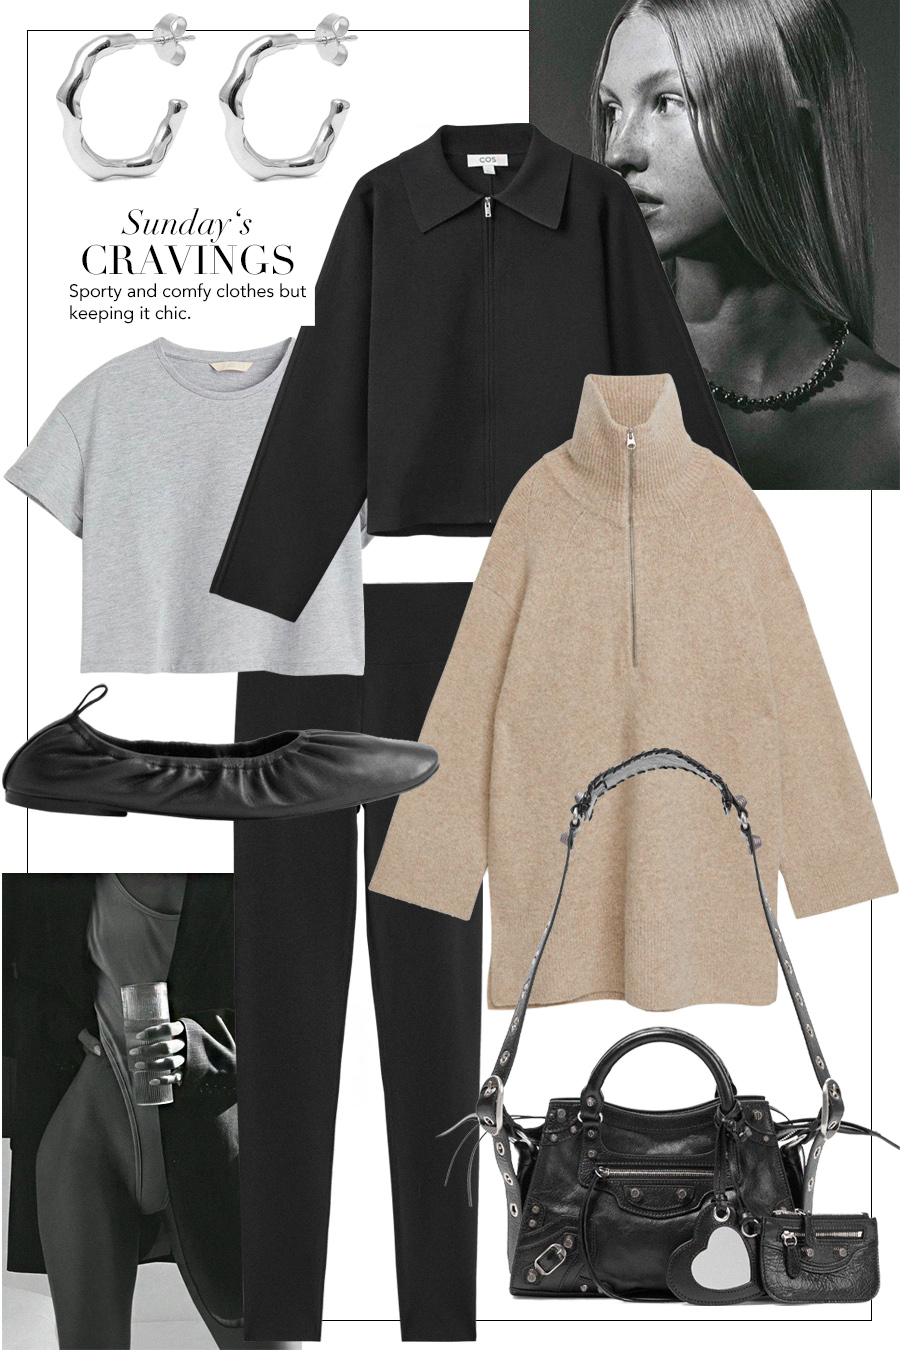 Sunday's Cravings: Sporty but keep it chic » teetharejade